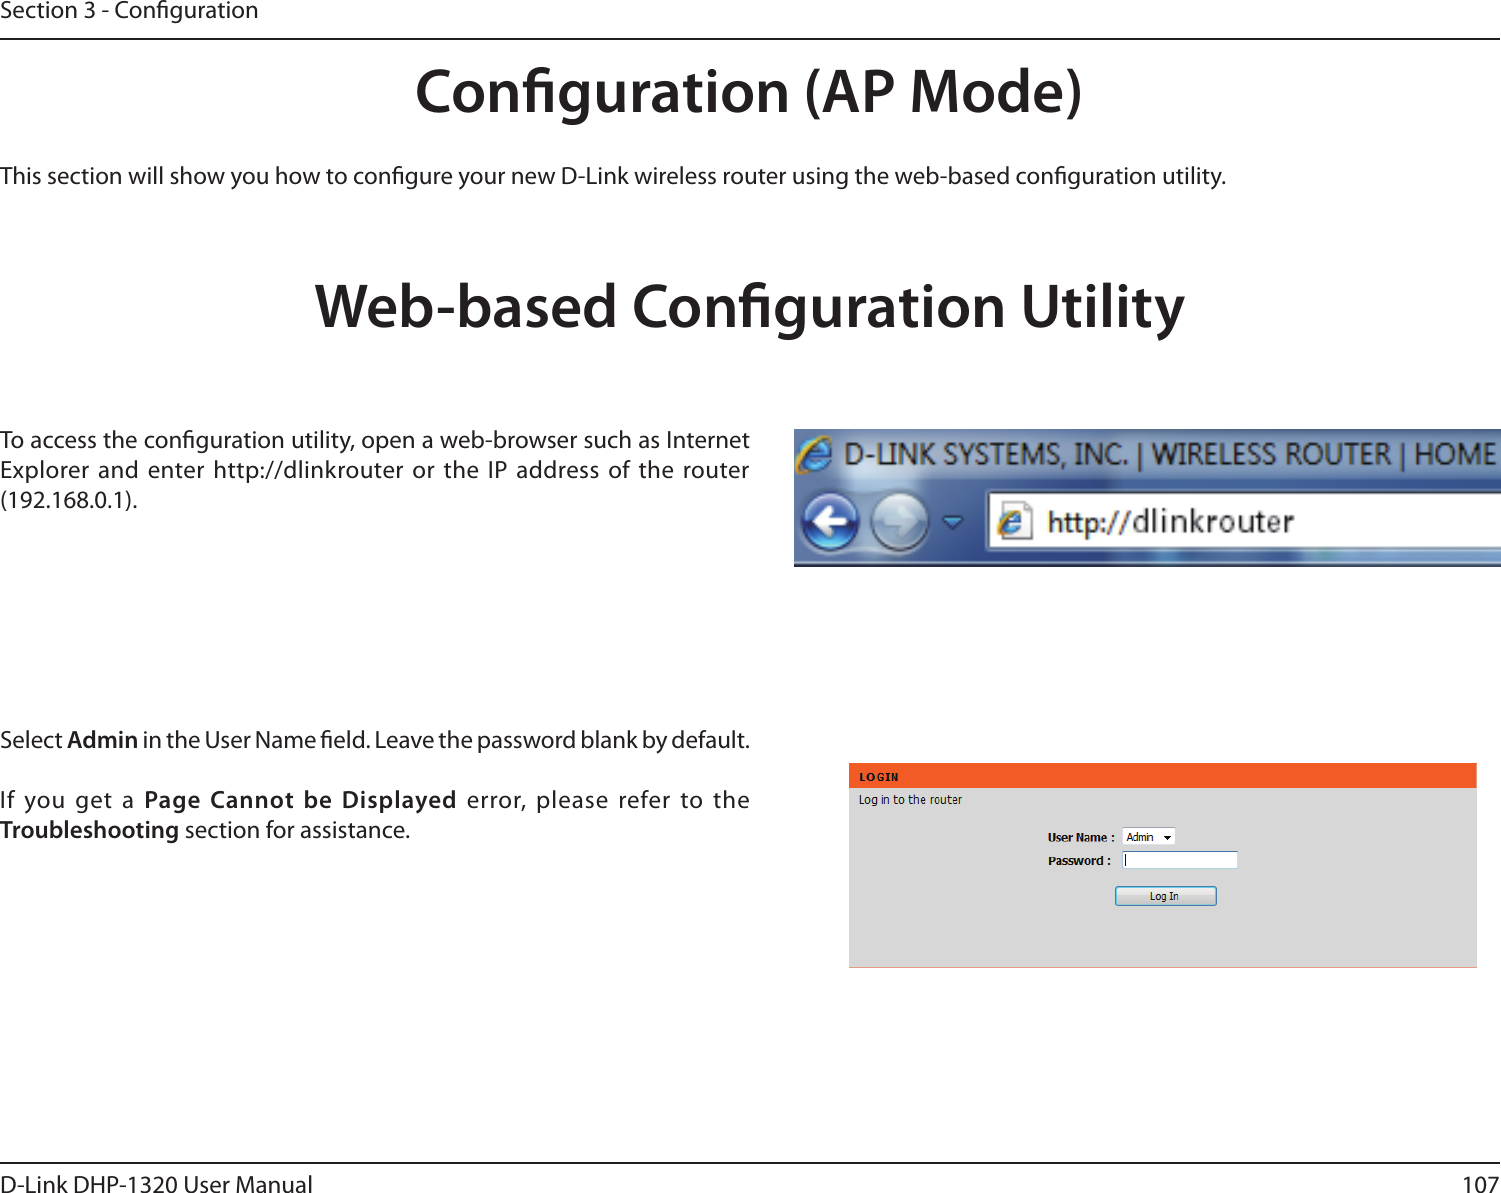 107D-Link DHP-1320 User ManualSection 3 - CongurationConguration (AP Mode)This section will show you how to congure your new D-Link wireless router using the web-based conguration utility.Web-based Conguration UtilityTo access the conguration utility, open a web-browser such as Internet Explorer and  enter http://dlinkrouter or the IP address of the router (192.168.0.1).Select Admin in the User Name eld. Leave the password blank by default. If you get a Page Cannot be Displayed error, please  refer to the Troubleshooting section for assistance.